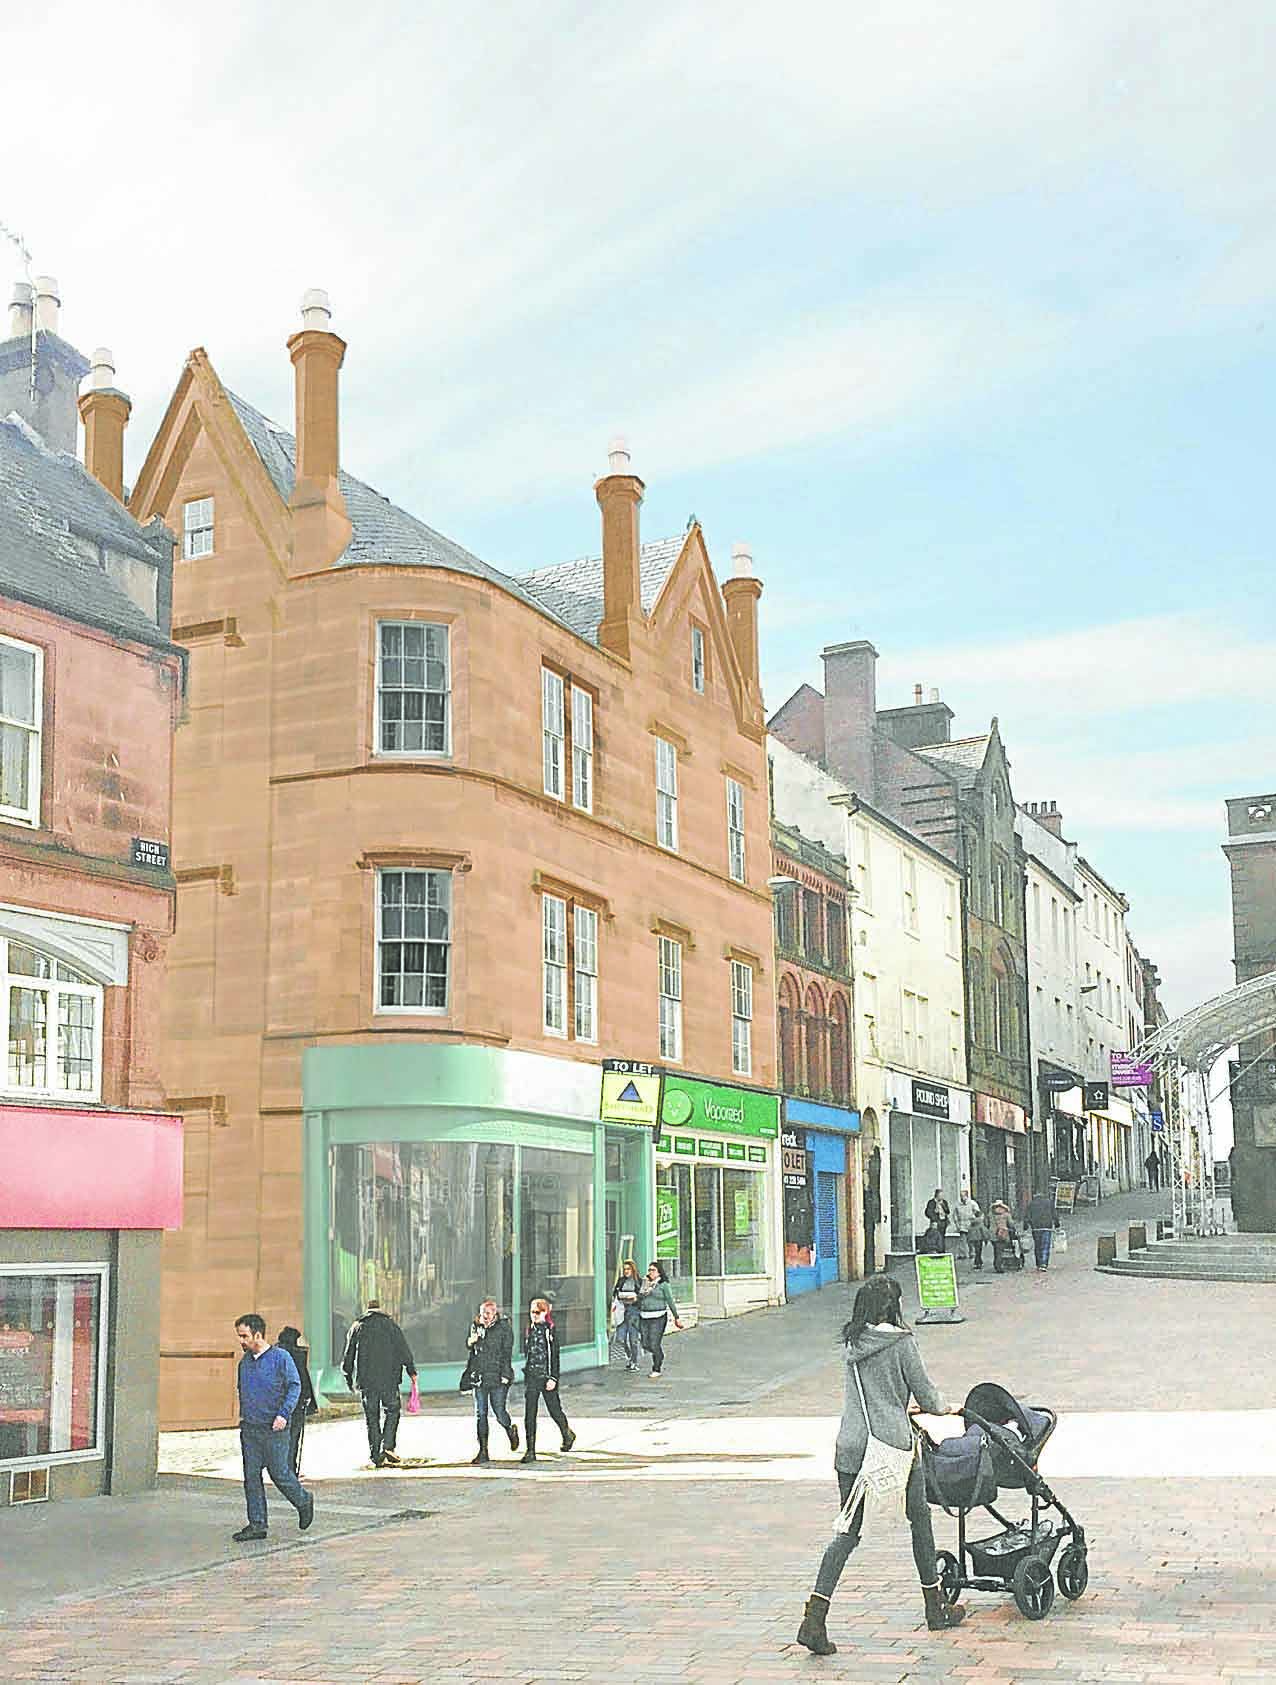 Flats plan for another town centre site